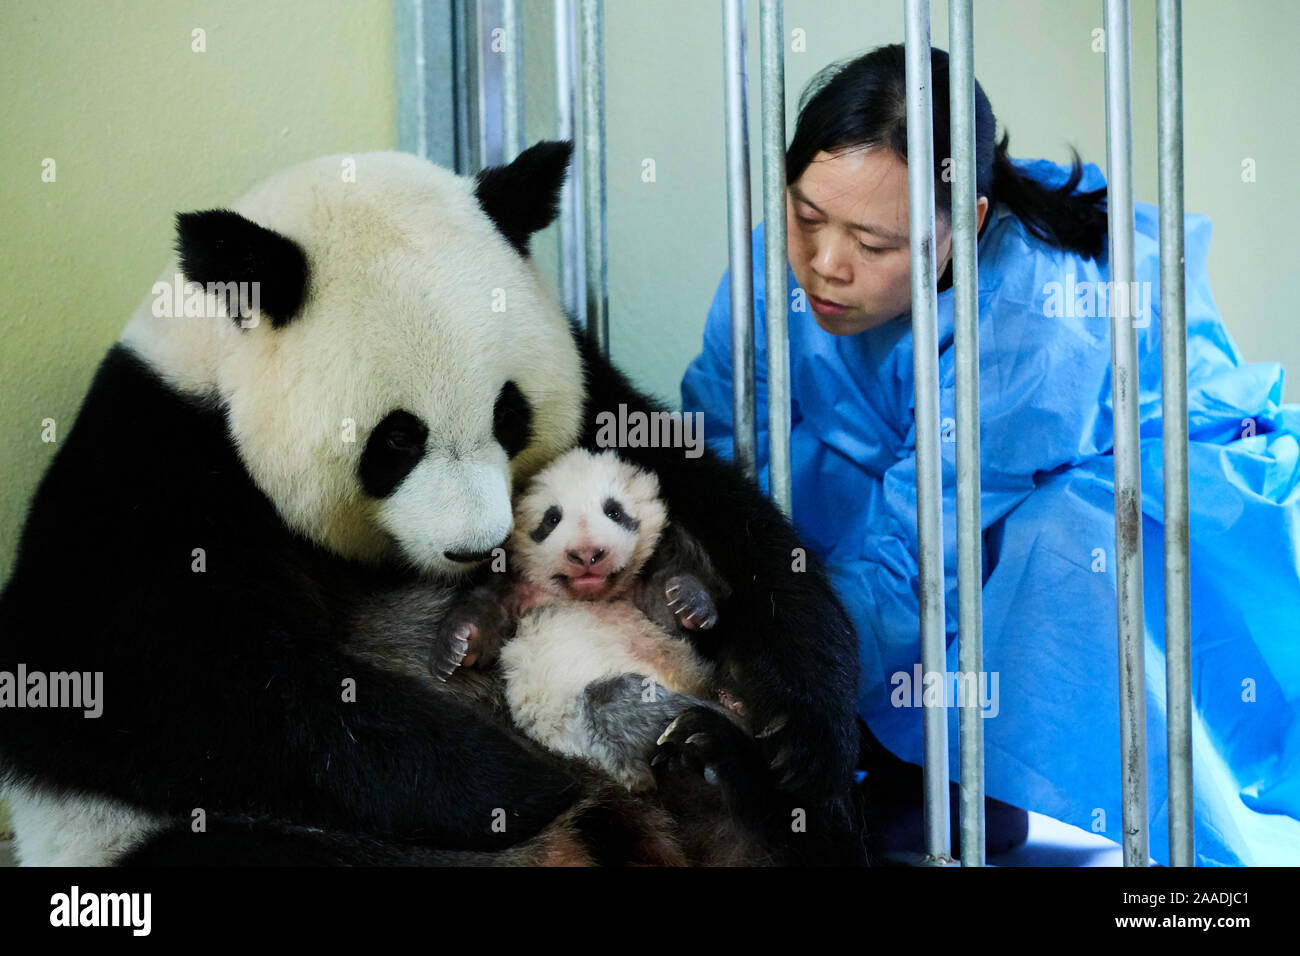 Keeper feeding Giant panda (Ailuropoda melanoleuca) female Huan Huan, whilst removing baby, age two months, for check up. Beauval Zoo, France, October 2017. Stock Photo